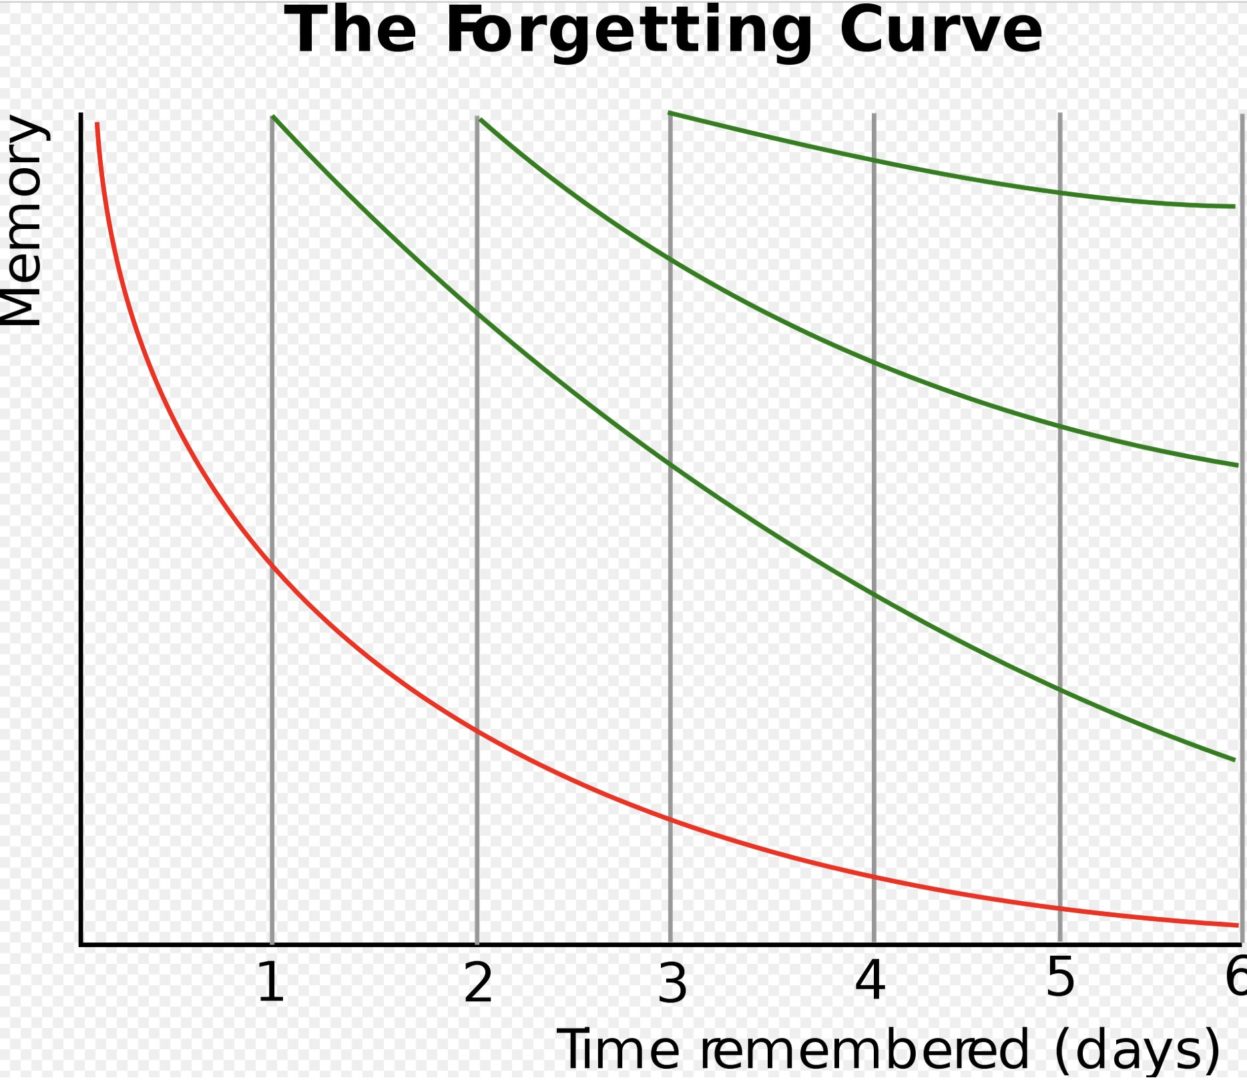 a graph showing the forgetfulness curve. There are multiple curved lines showing that you forget things very quickly unless you practice them multiple times